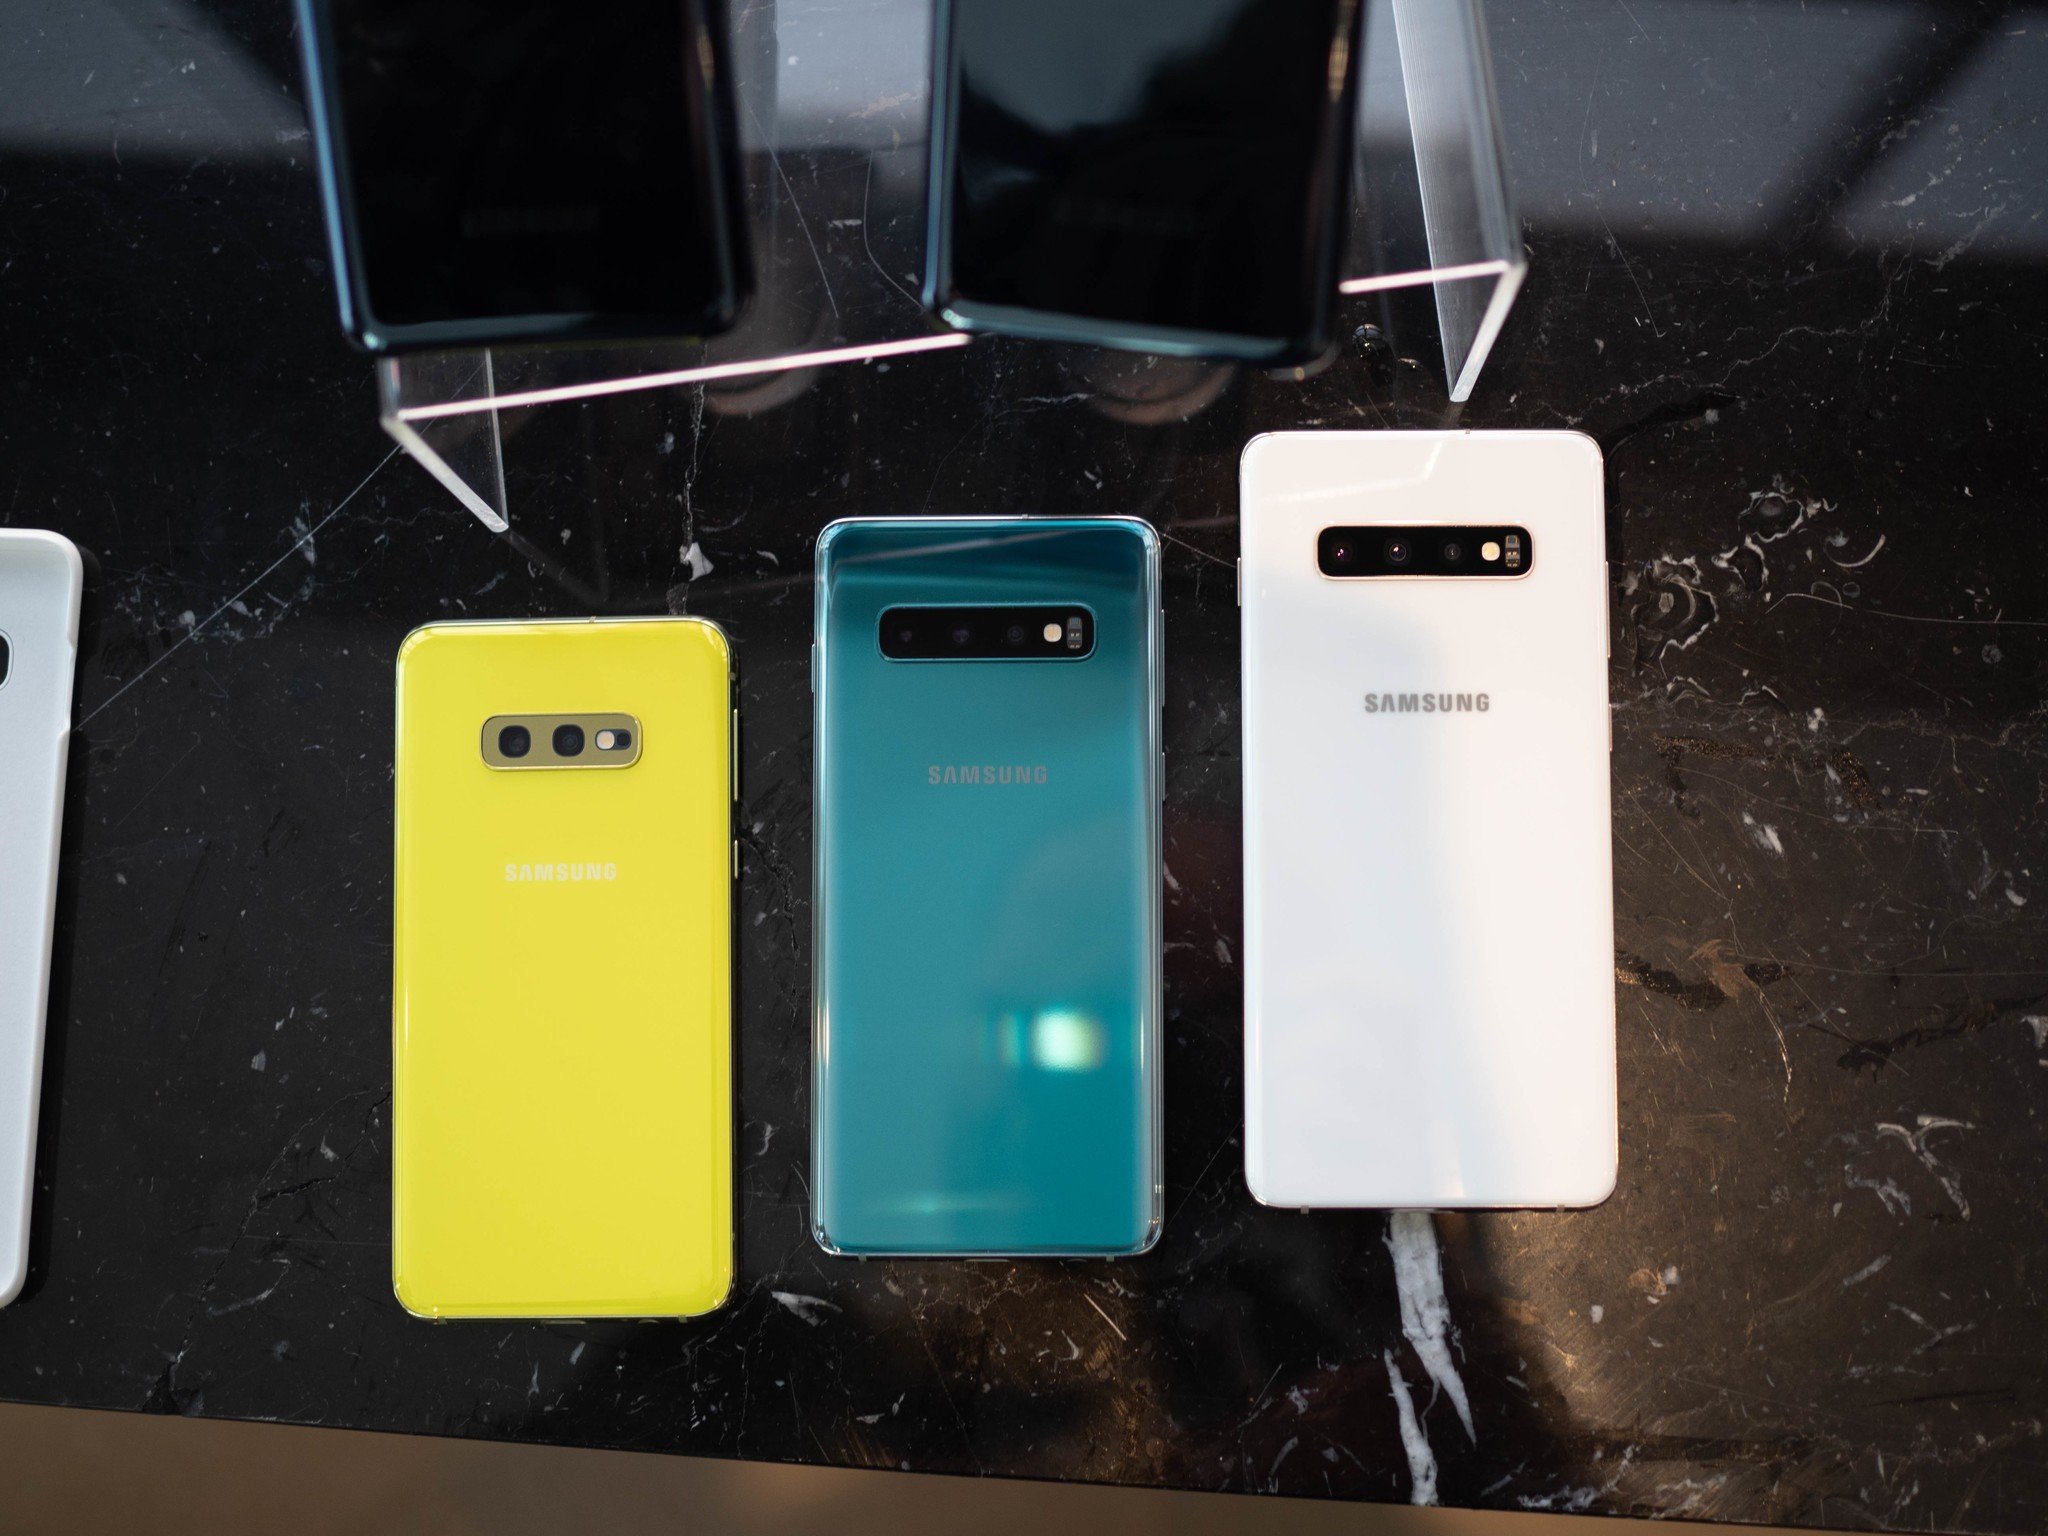 https://www.androidcentral.com/sites/androidcentral.com/files/styles/large_wm_brw/public/article_images/2019/02/samsung-galaxy-s10-all-back-1.jpg?itok=FSFBQcUb